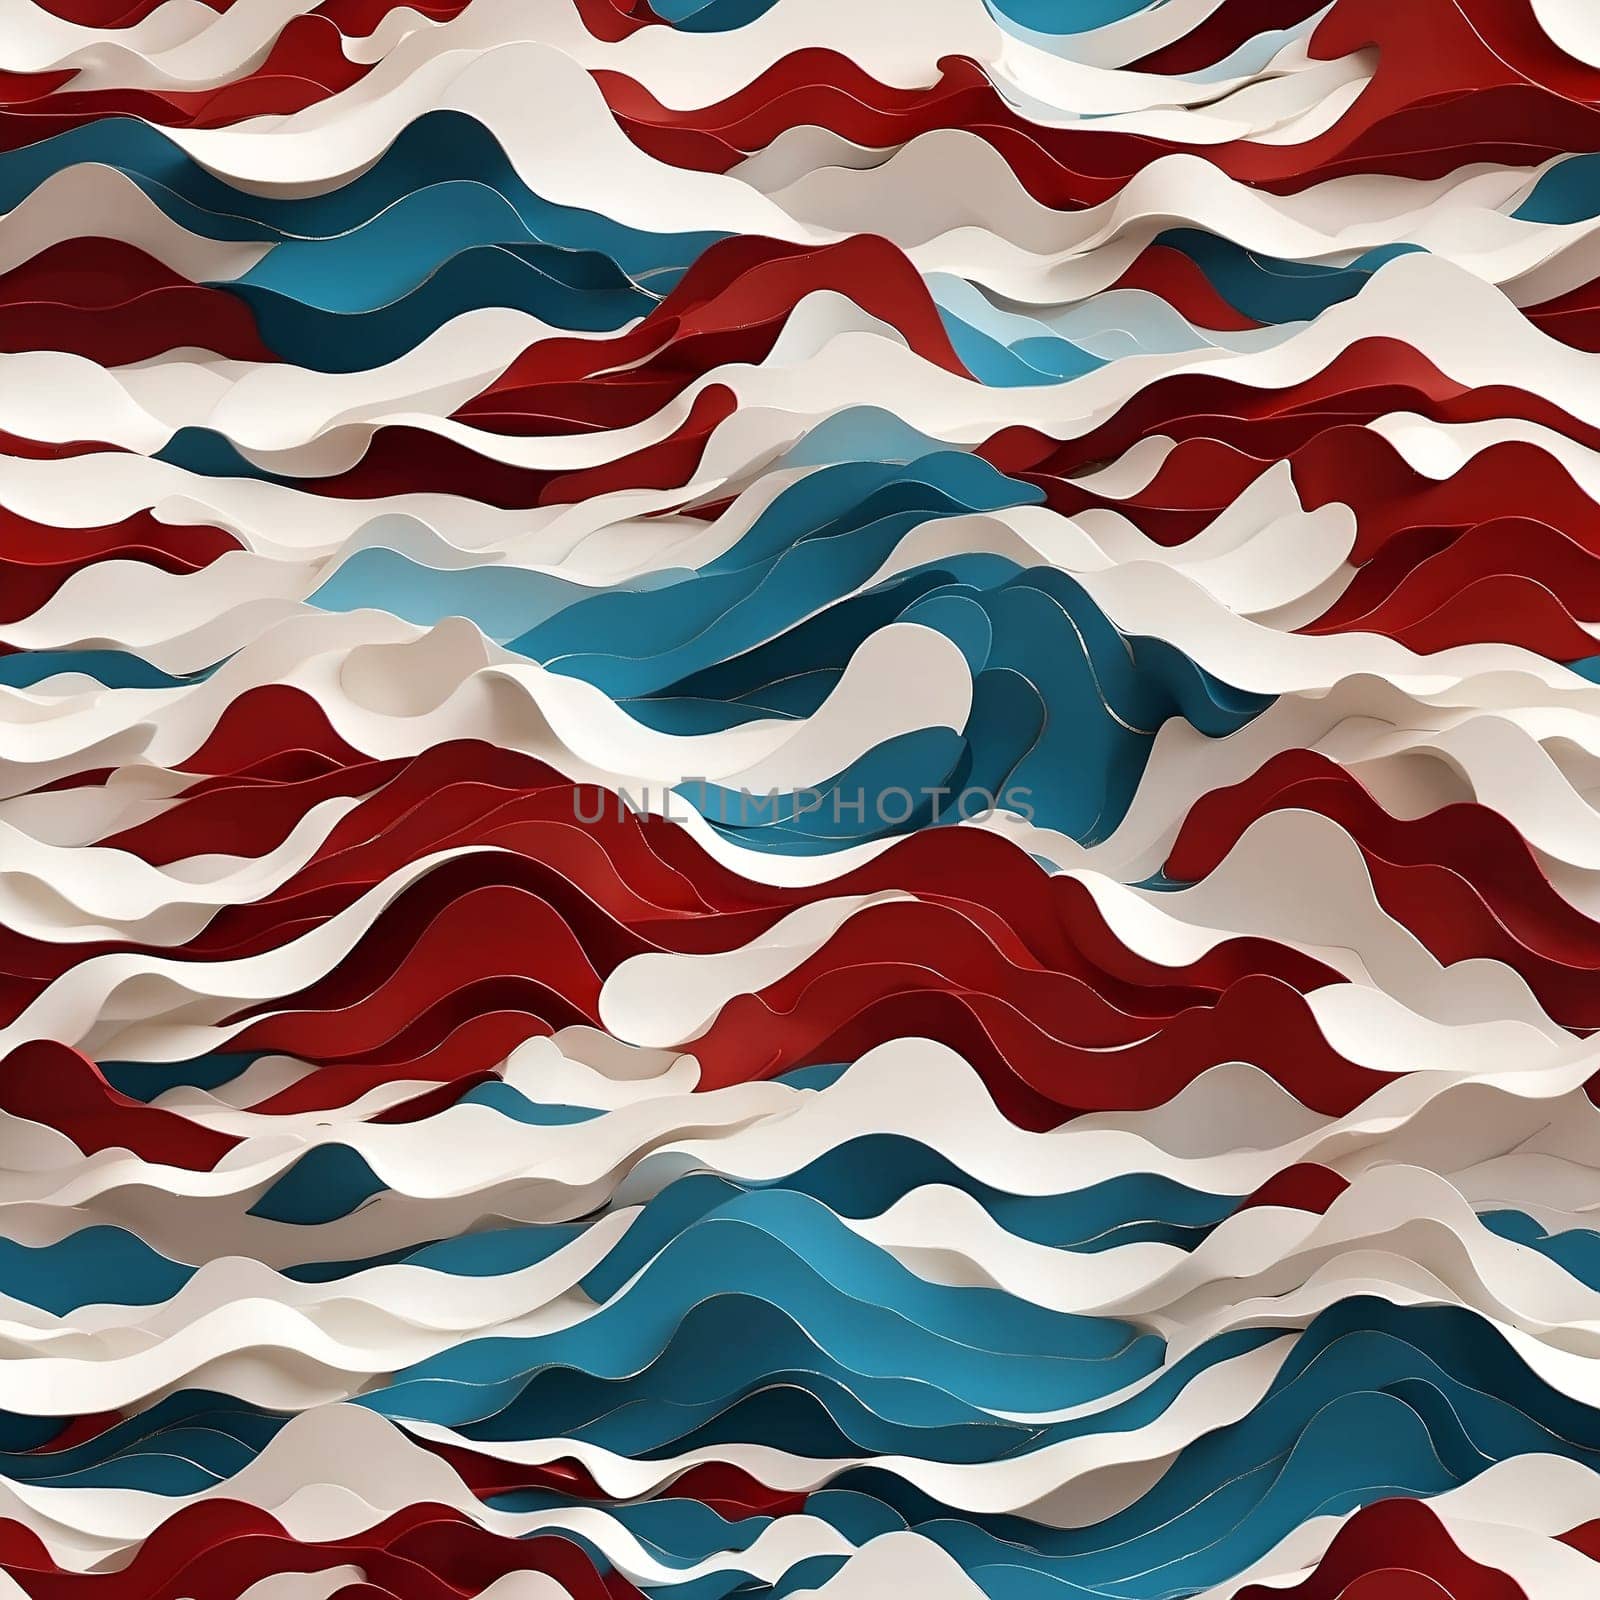 An eye-catching seamless pattern with dynamic waves in red, white, and blue.